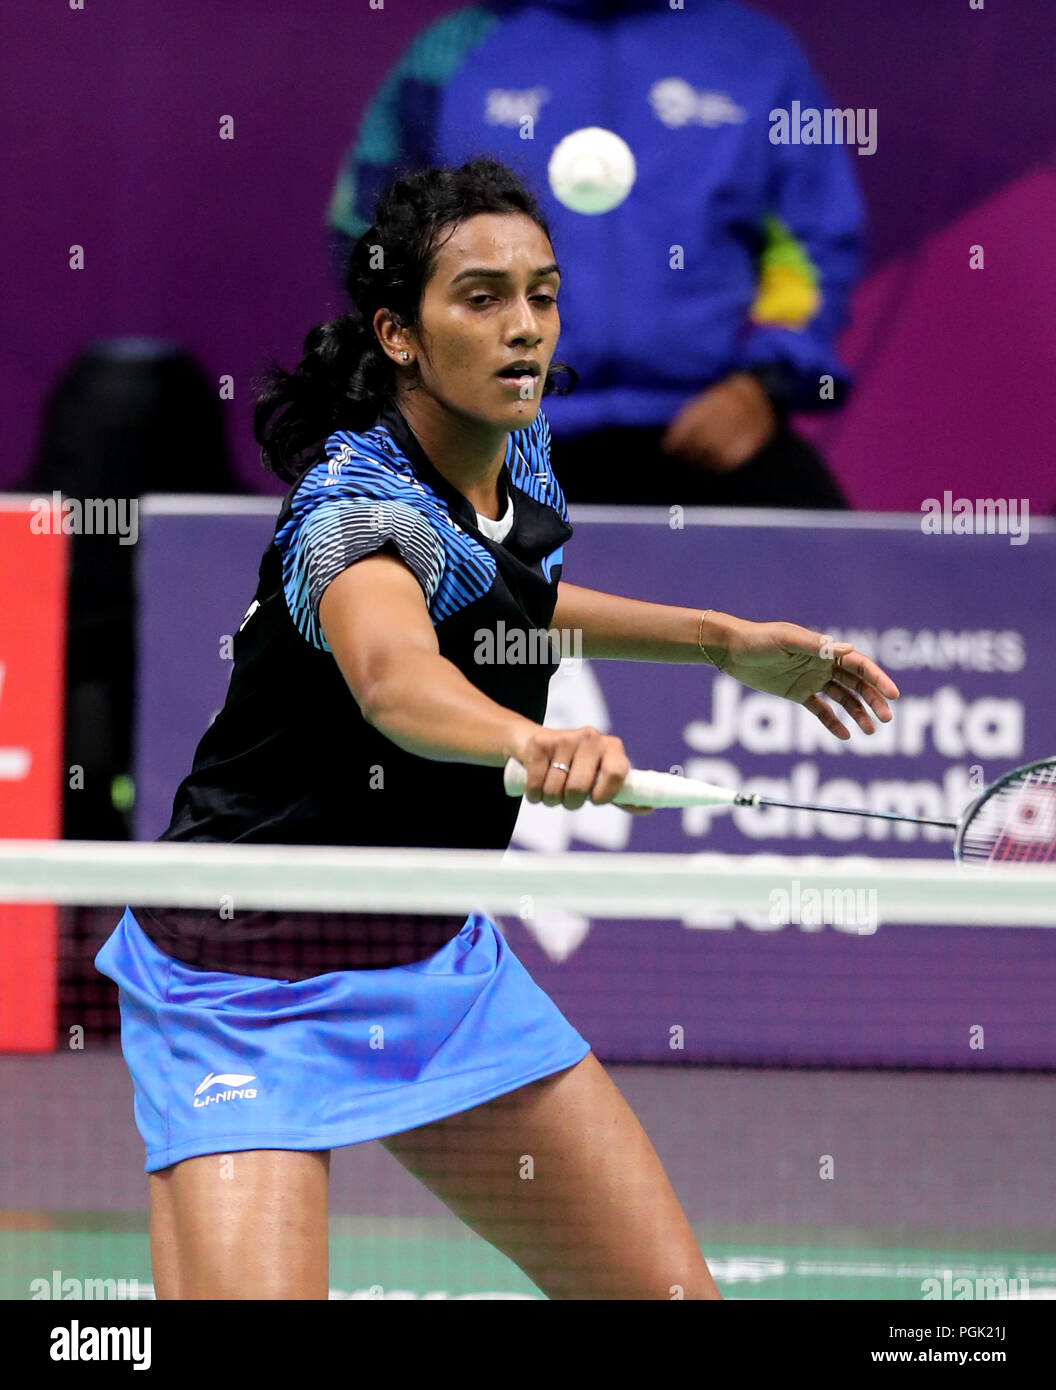 Jakarta, Indonesia, 27th Aug 2018 Badminton Semifinals Indias PV Sindhu defeated World No.2 Akane Yagamuchi of Japan 21-17, 15-21, 21-10 to enter the final of the womens singles event in Jakarta